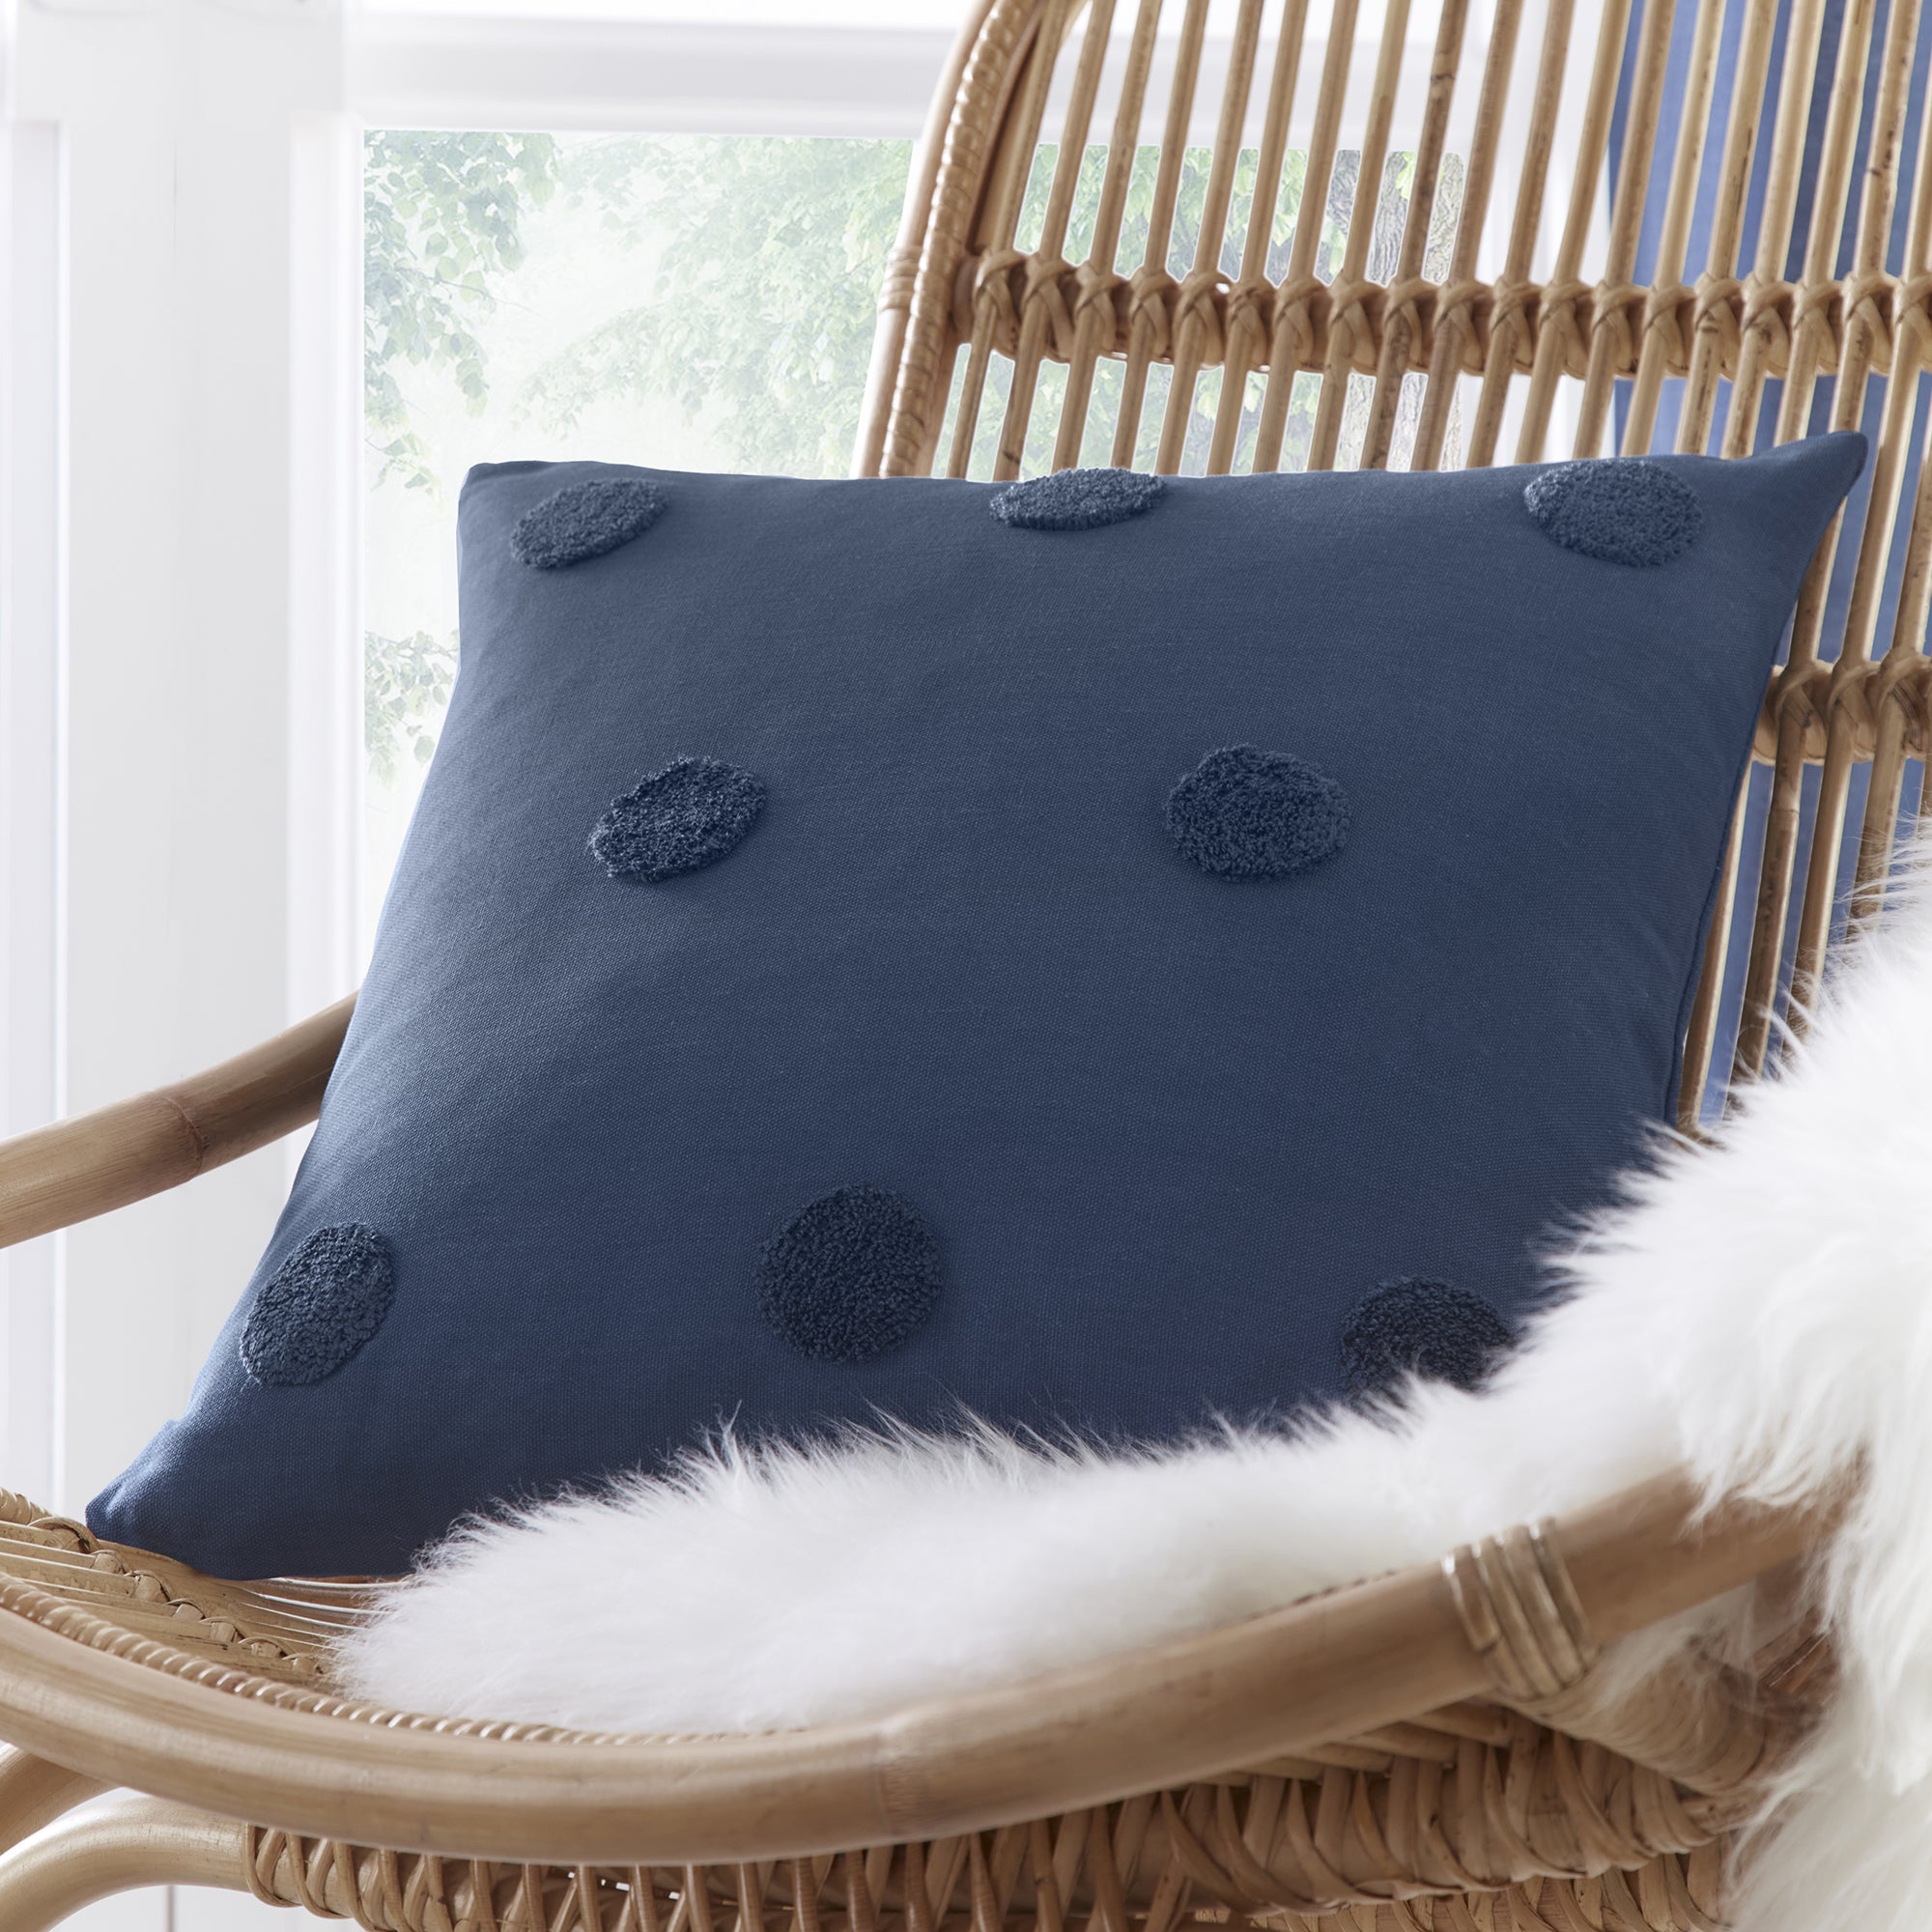 Zara - Tufted Spots Filled Cushion - by Appletree Boutique